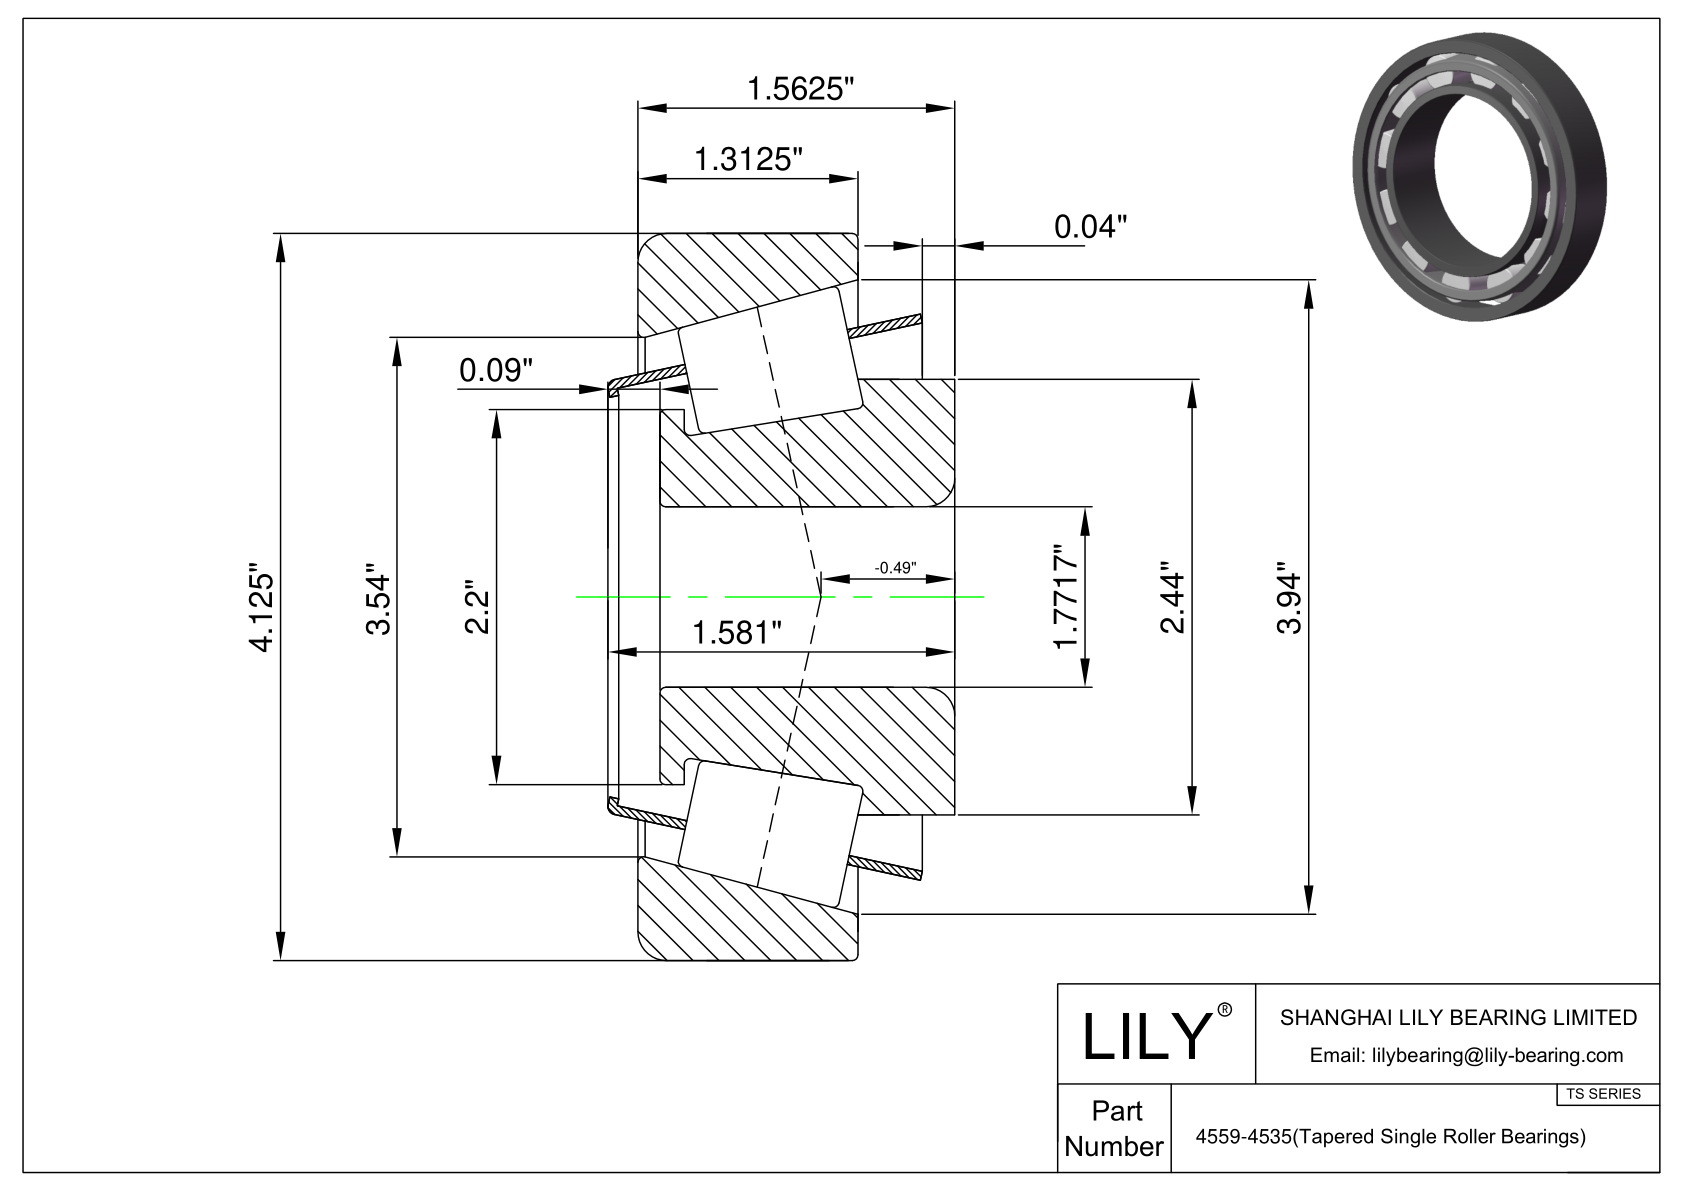 4559-4535 TS (Tapered Single Roller Bearings) (Imperial) cad drawing